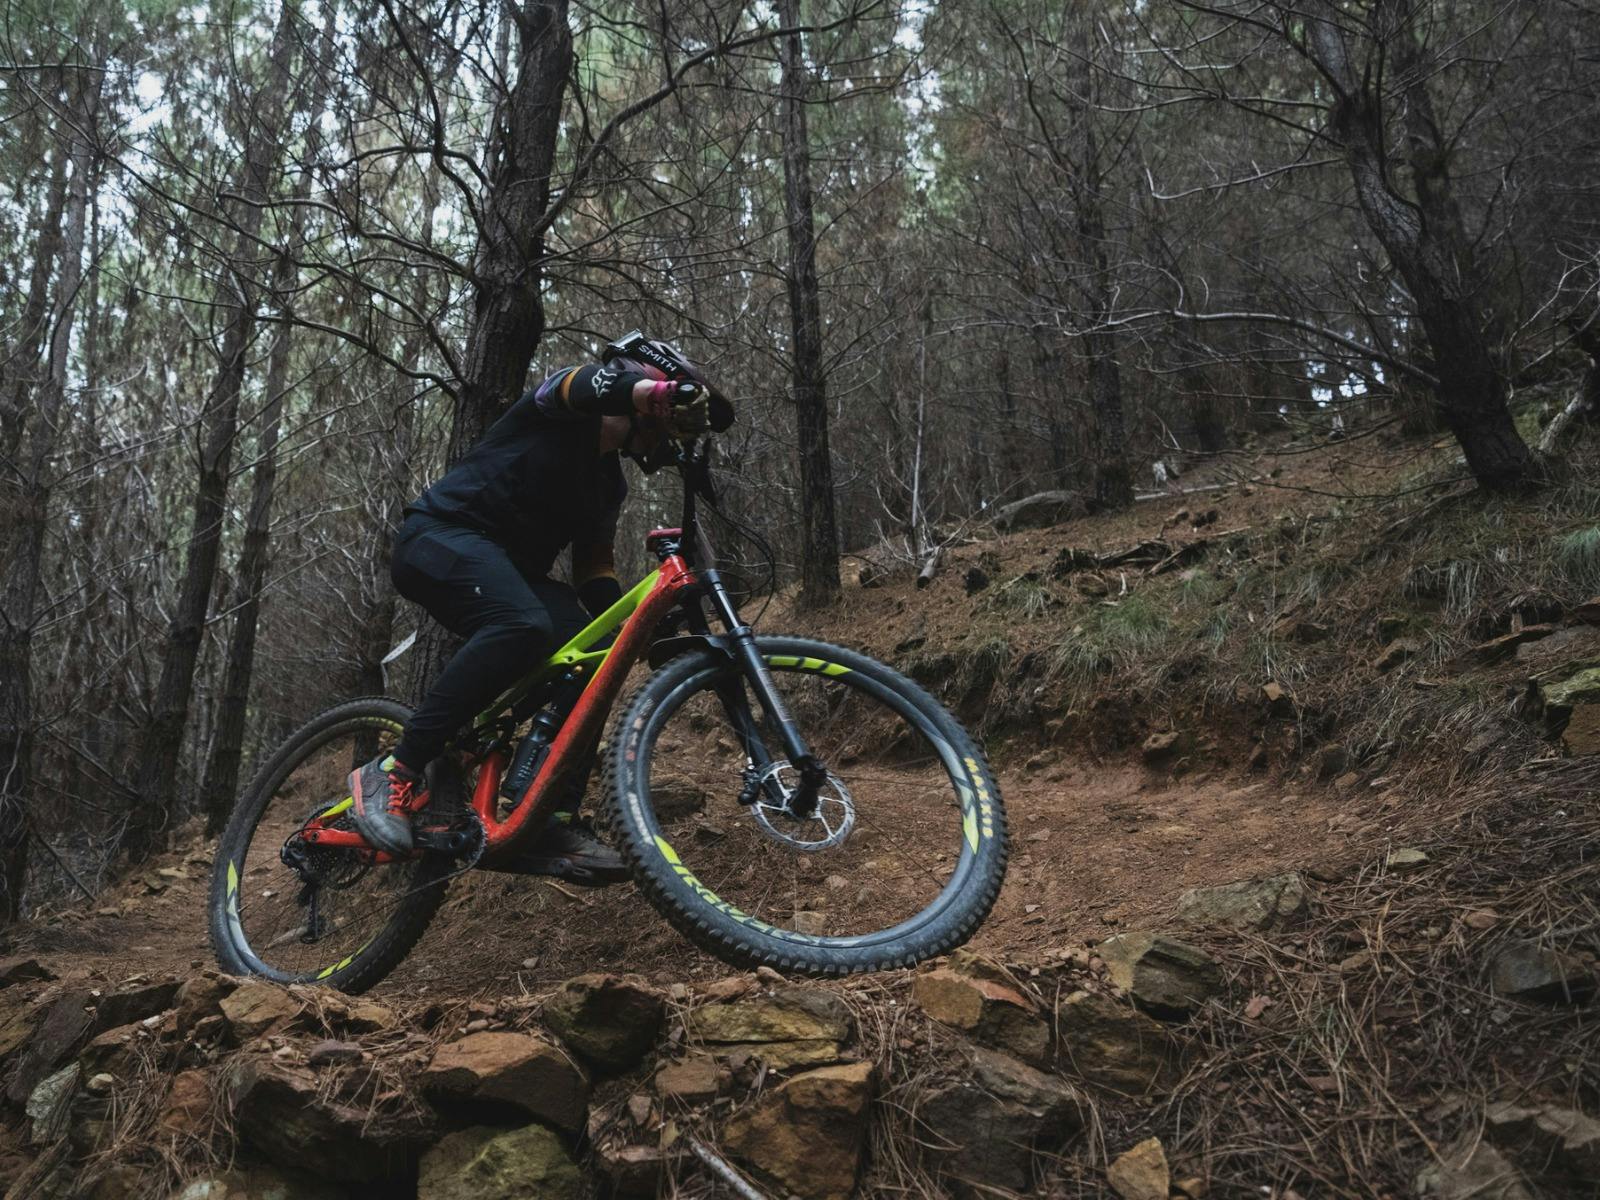 A rider on a red and yellow bike turns a corner up a hill in a dark forest.